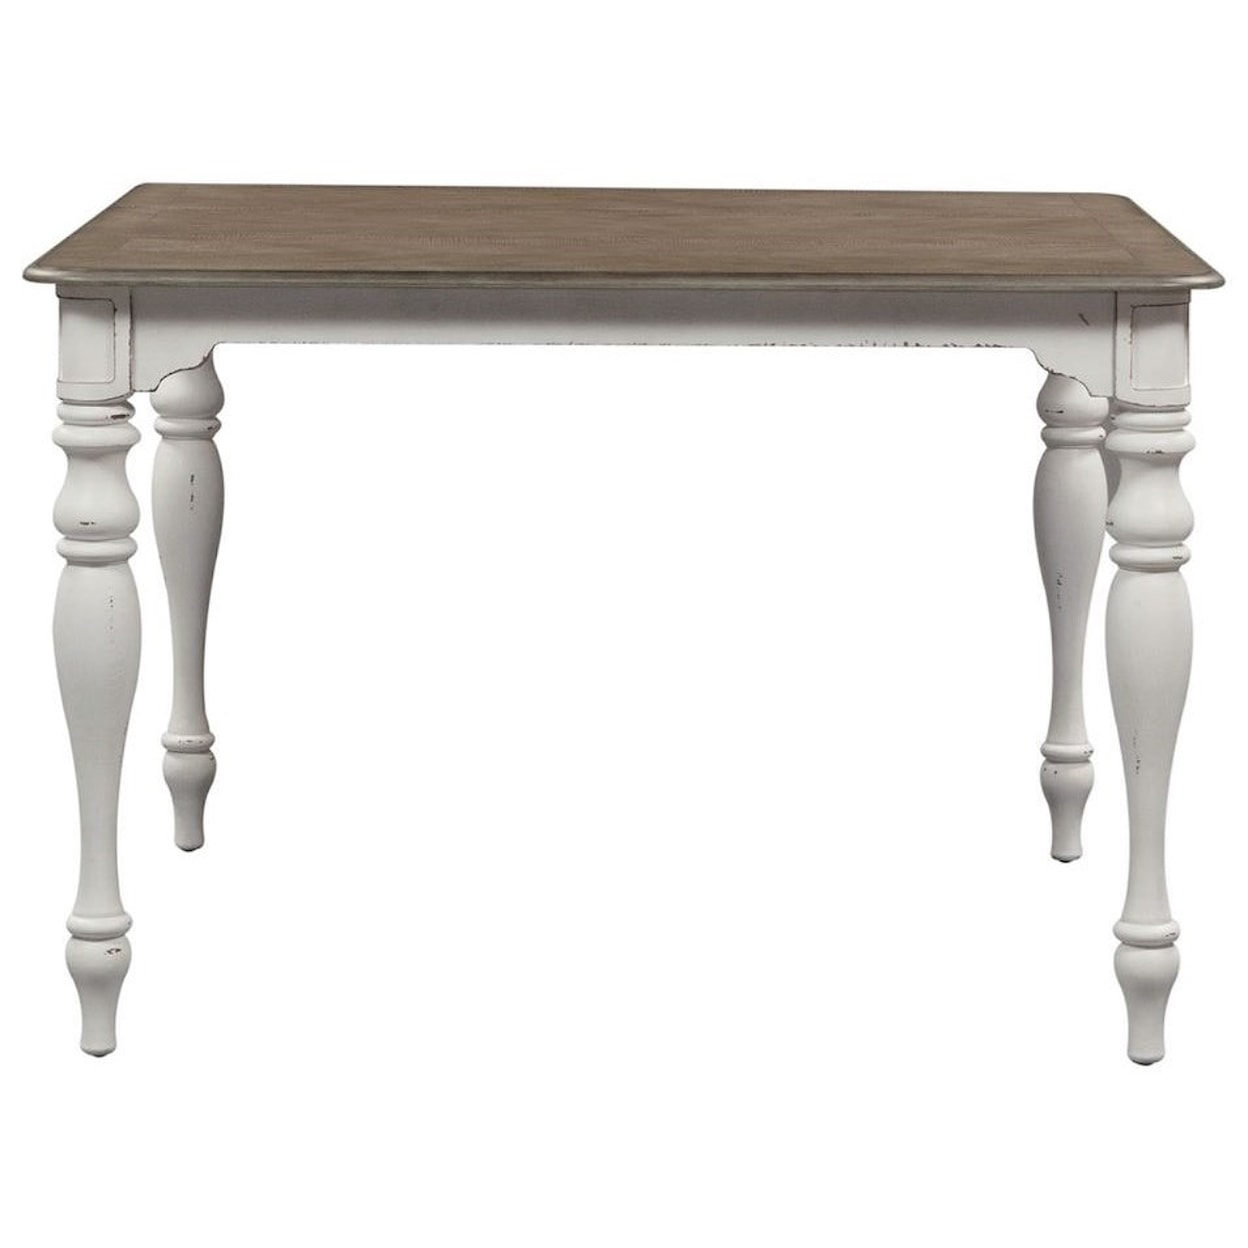 Libby Morgan Counter Height Table